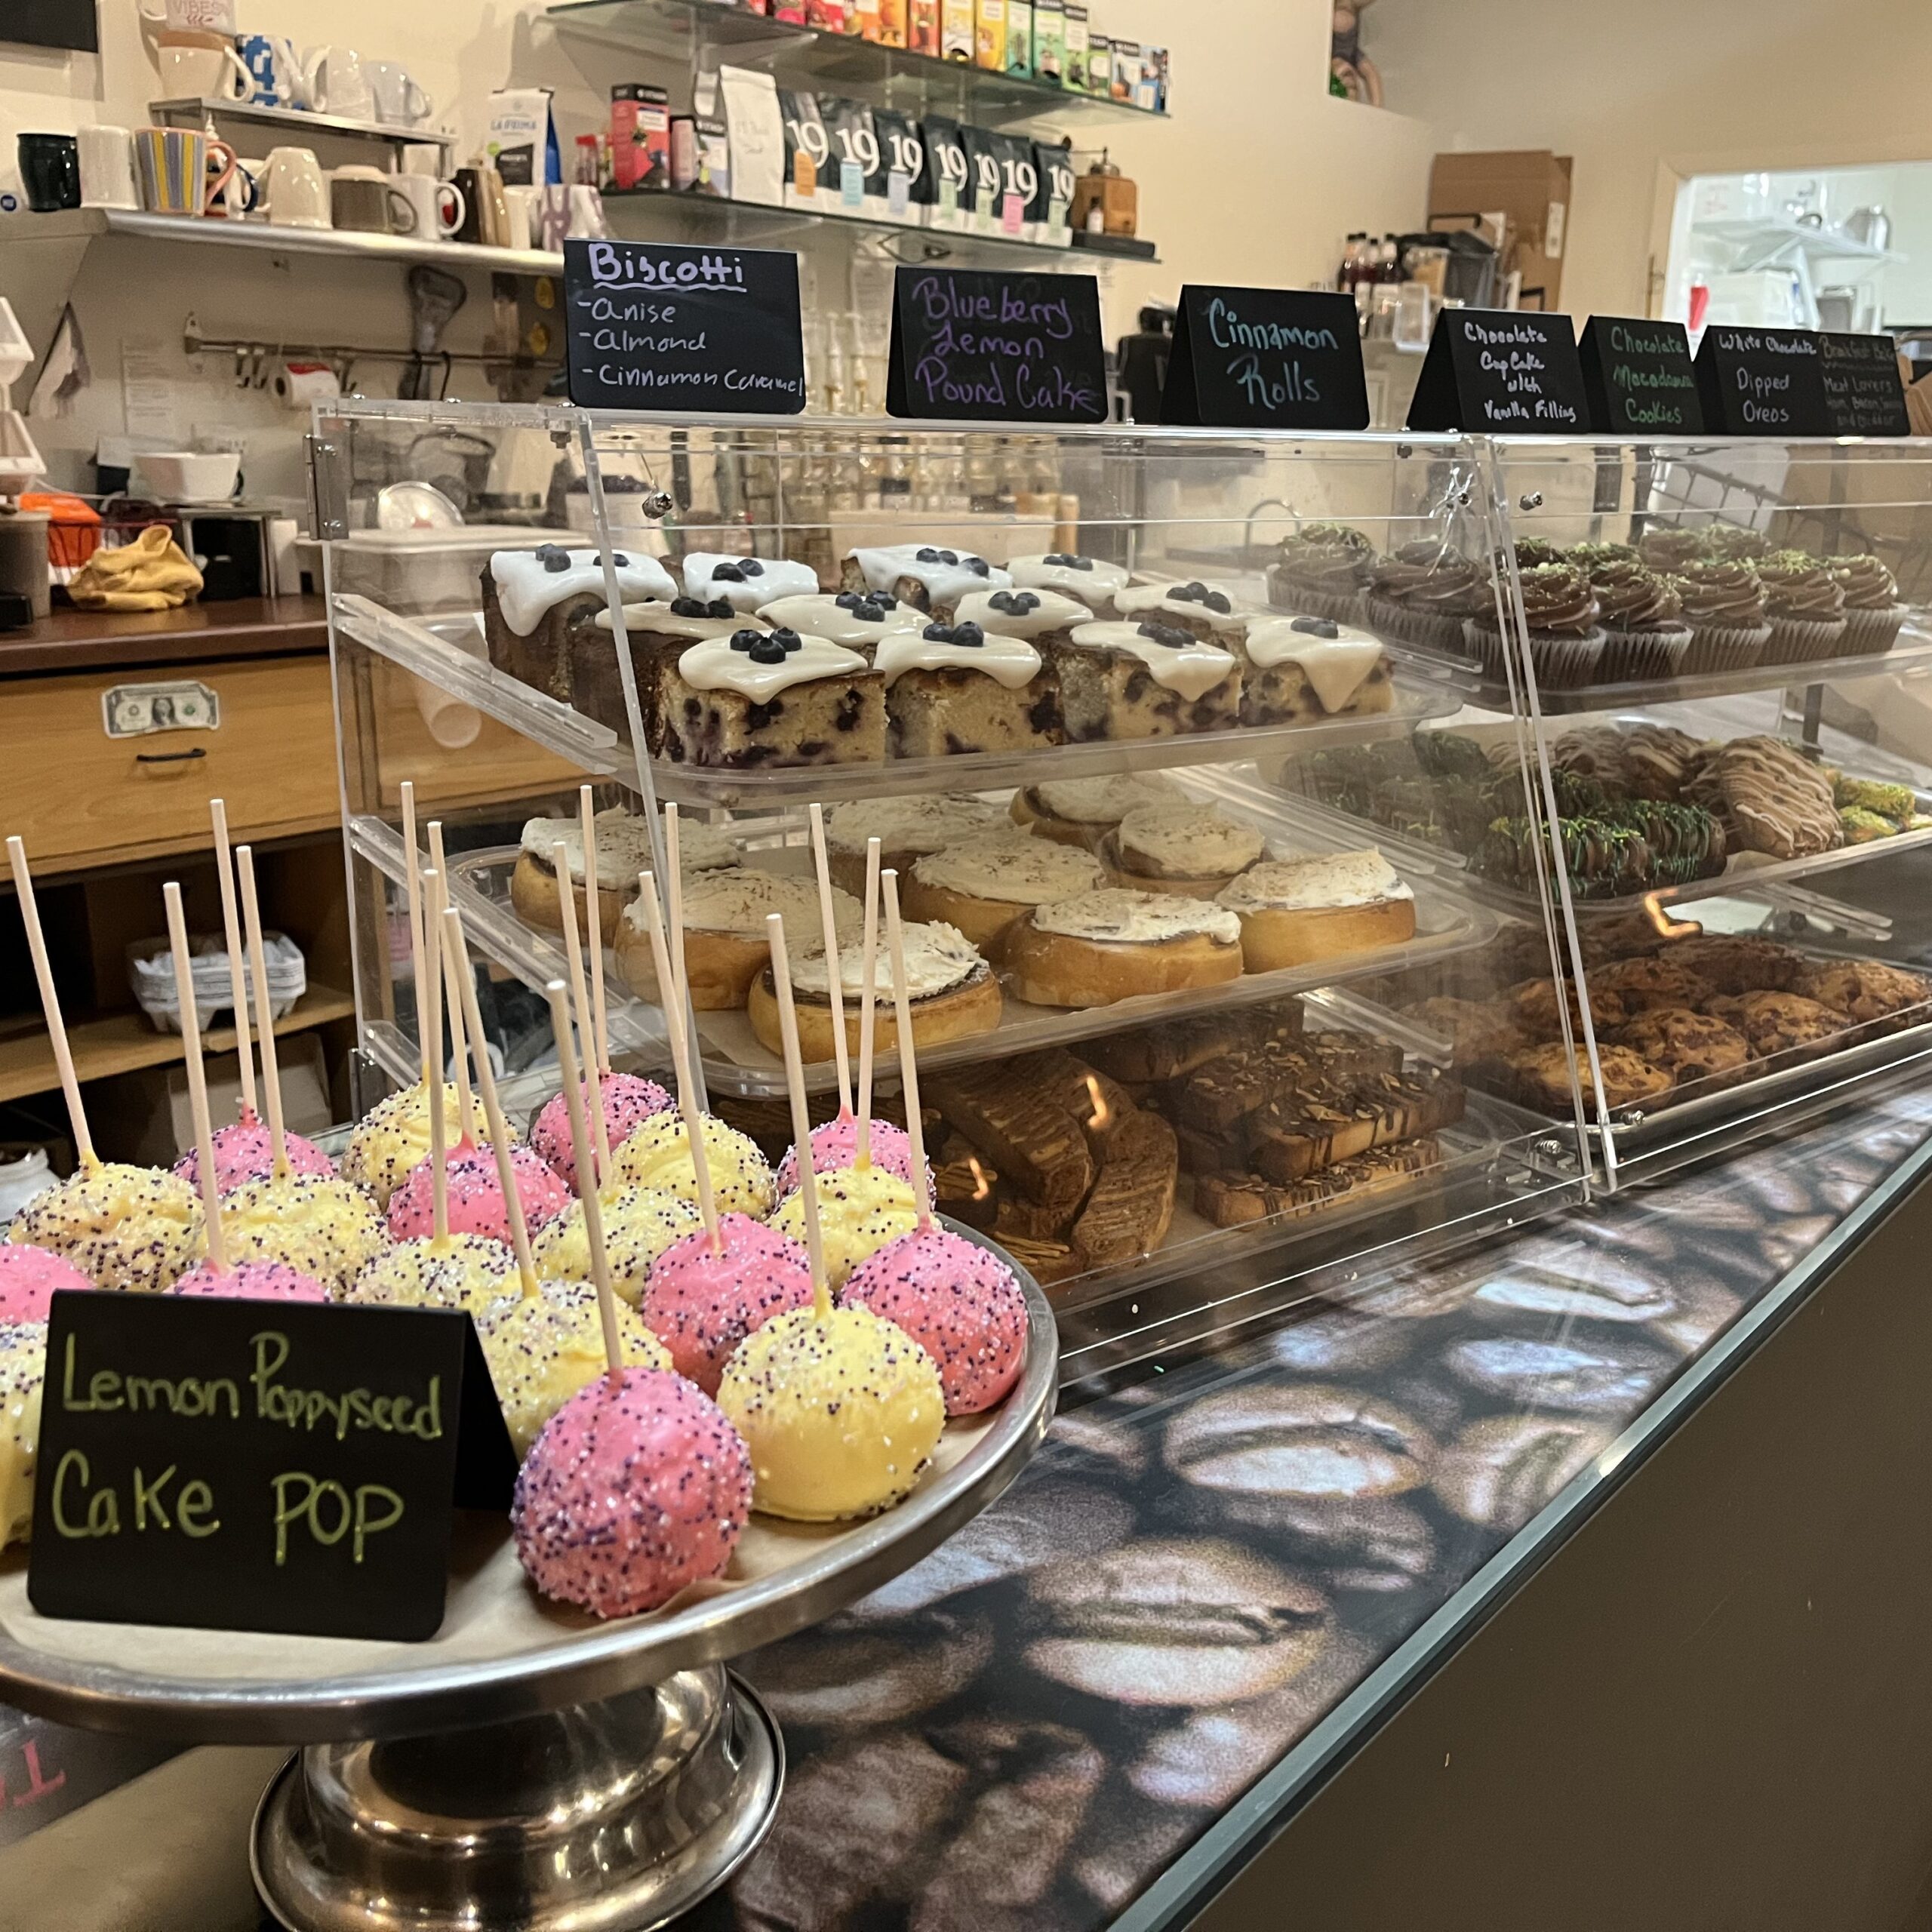 A photo of the inside of Potomac Station Coffeehouse, with cakepops and pastries available to purchase.